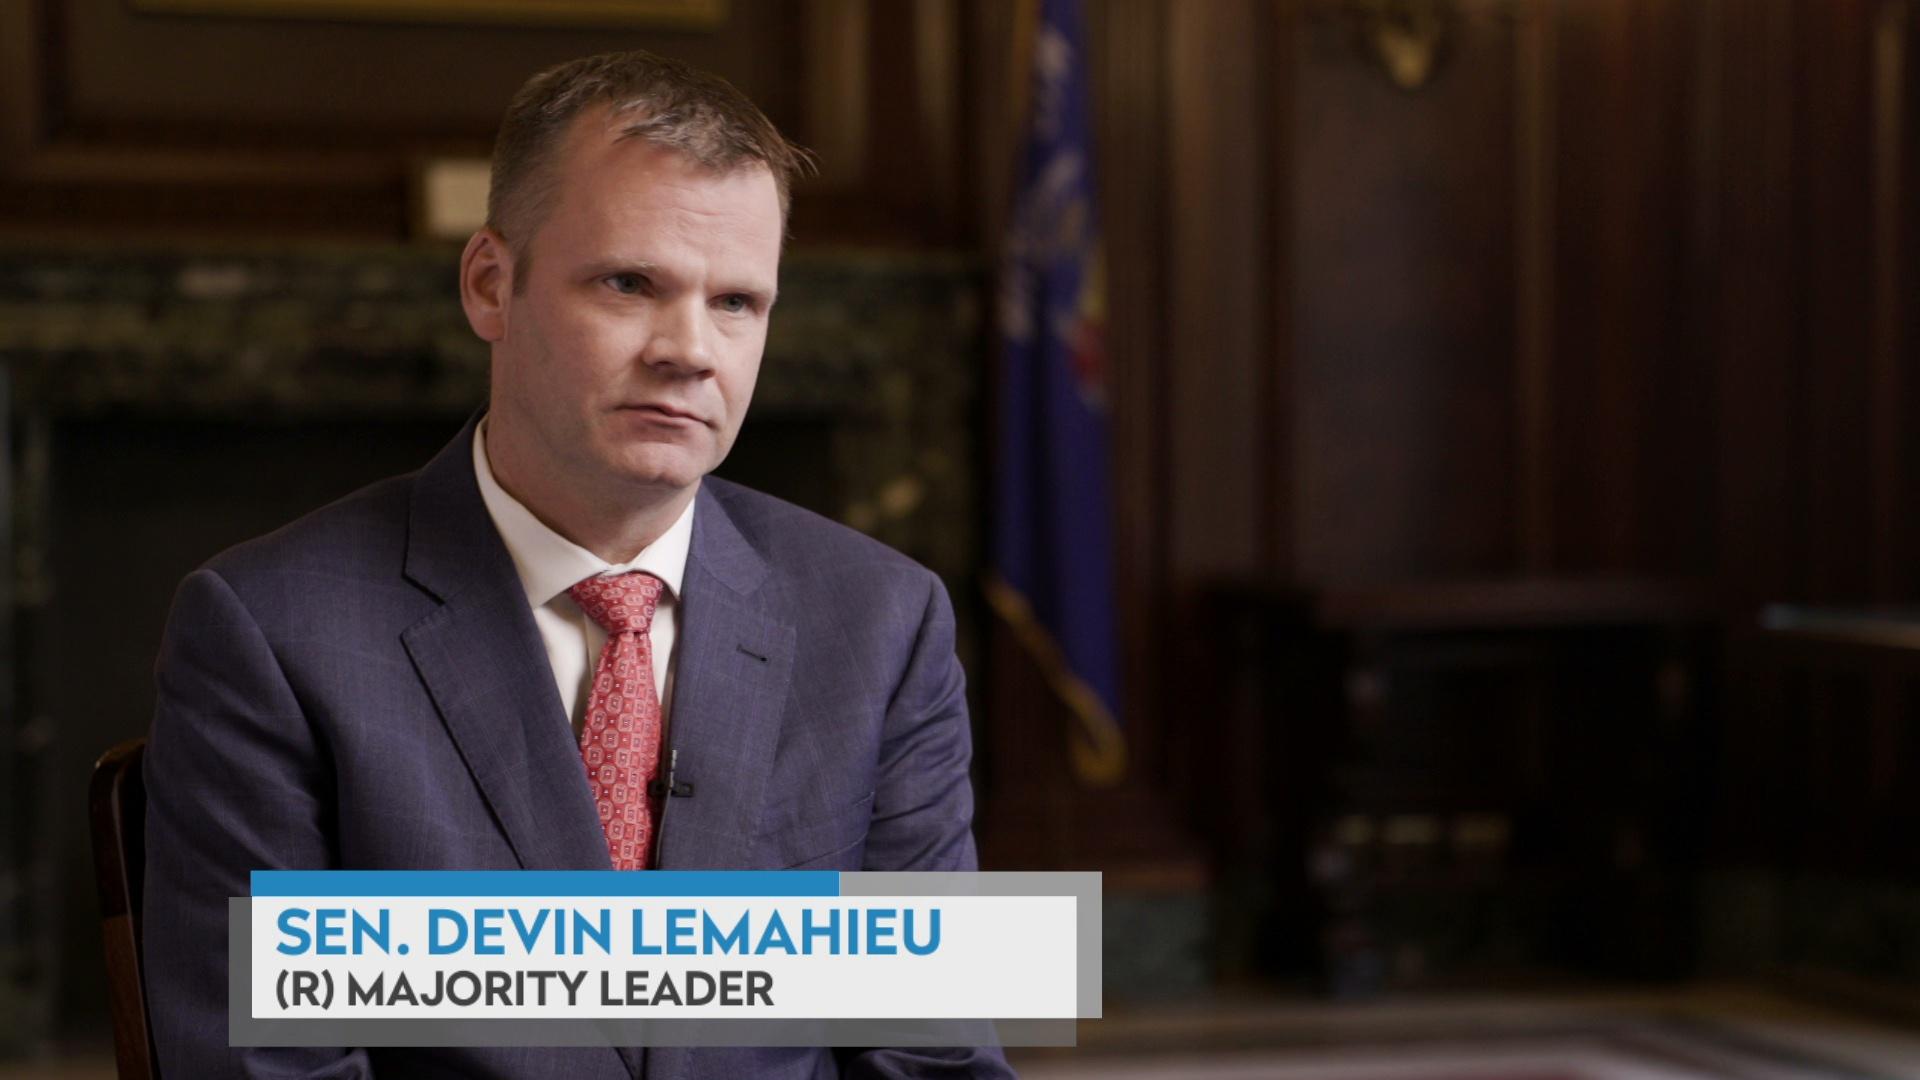 Sen. Devin LeMahieu on Wisconsin’s 2023 budget, appointments